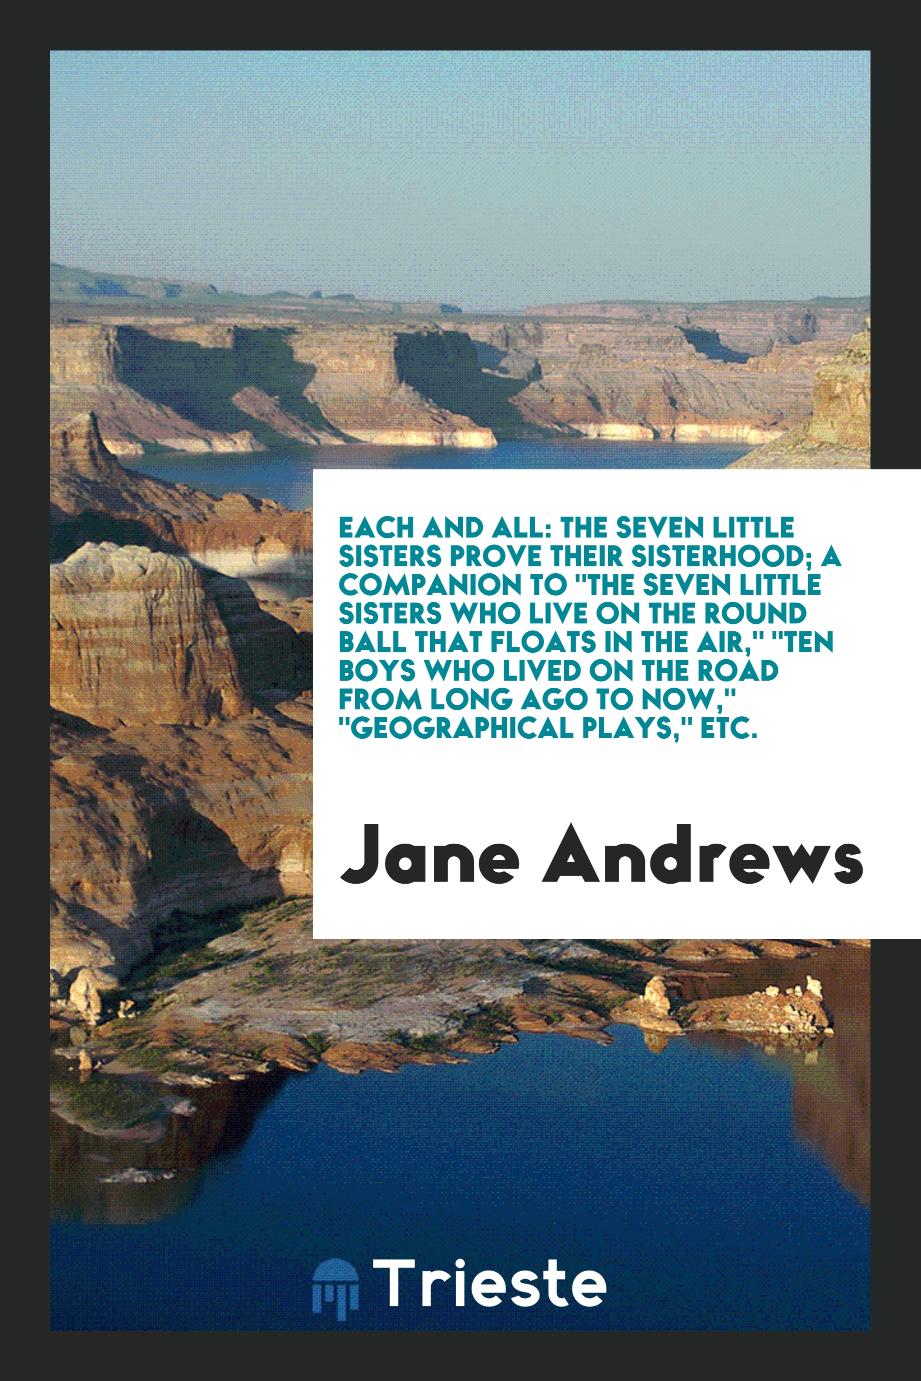 Each and All: The Seven Little Sisters Prove Their Sisterhood; A Companion To "The Seven Little Sisters Who Live on the Round Ball That Floats in the Air," "Ten Boys Who Lived on the Road from Long Ago to Now," "Geographical Plays," Etc.